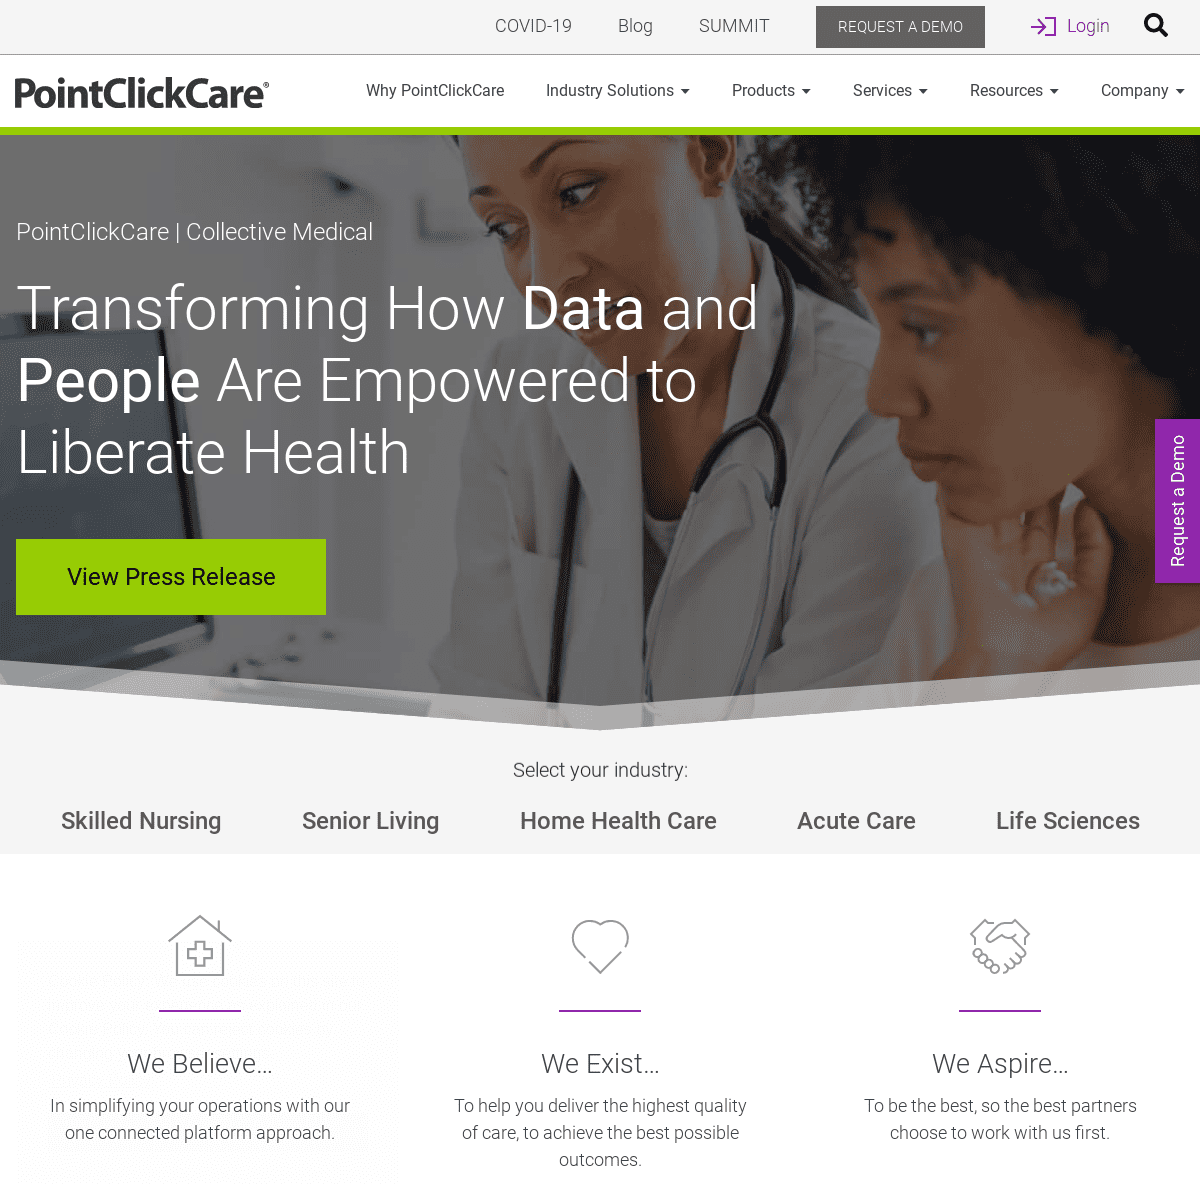 A complete backup of https://pointclickcare.com